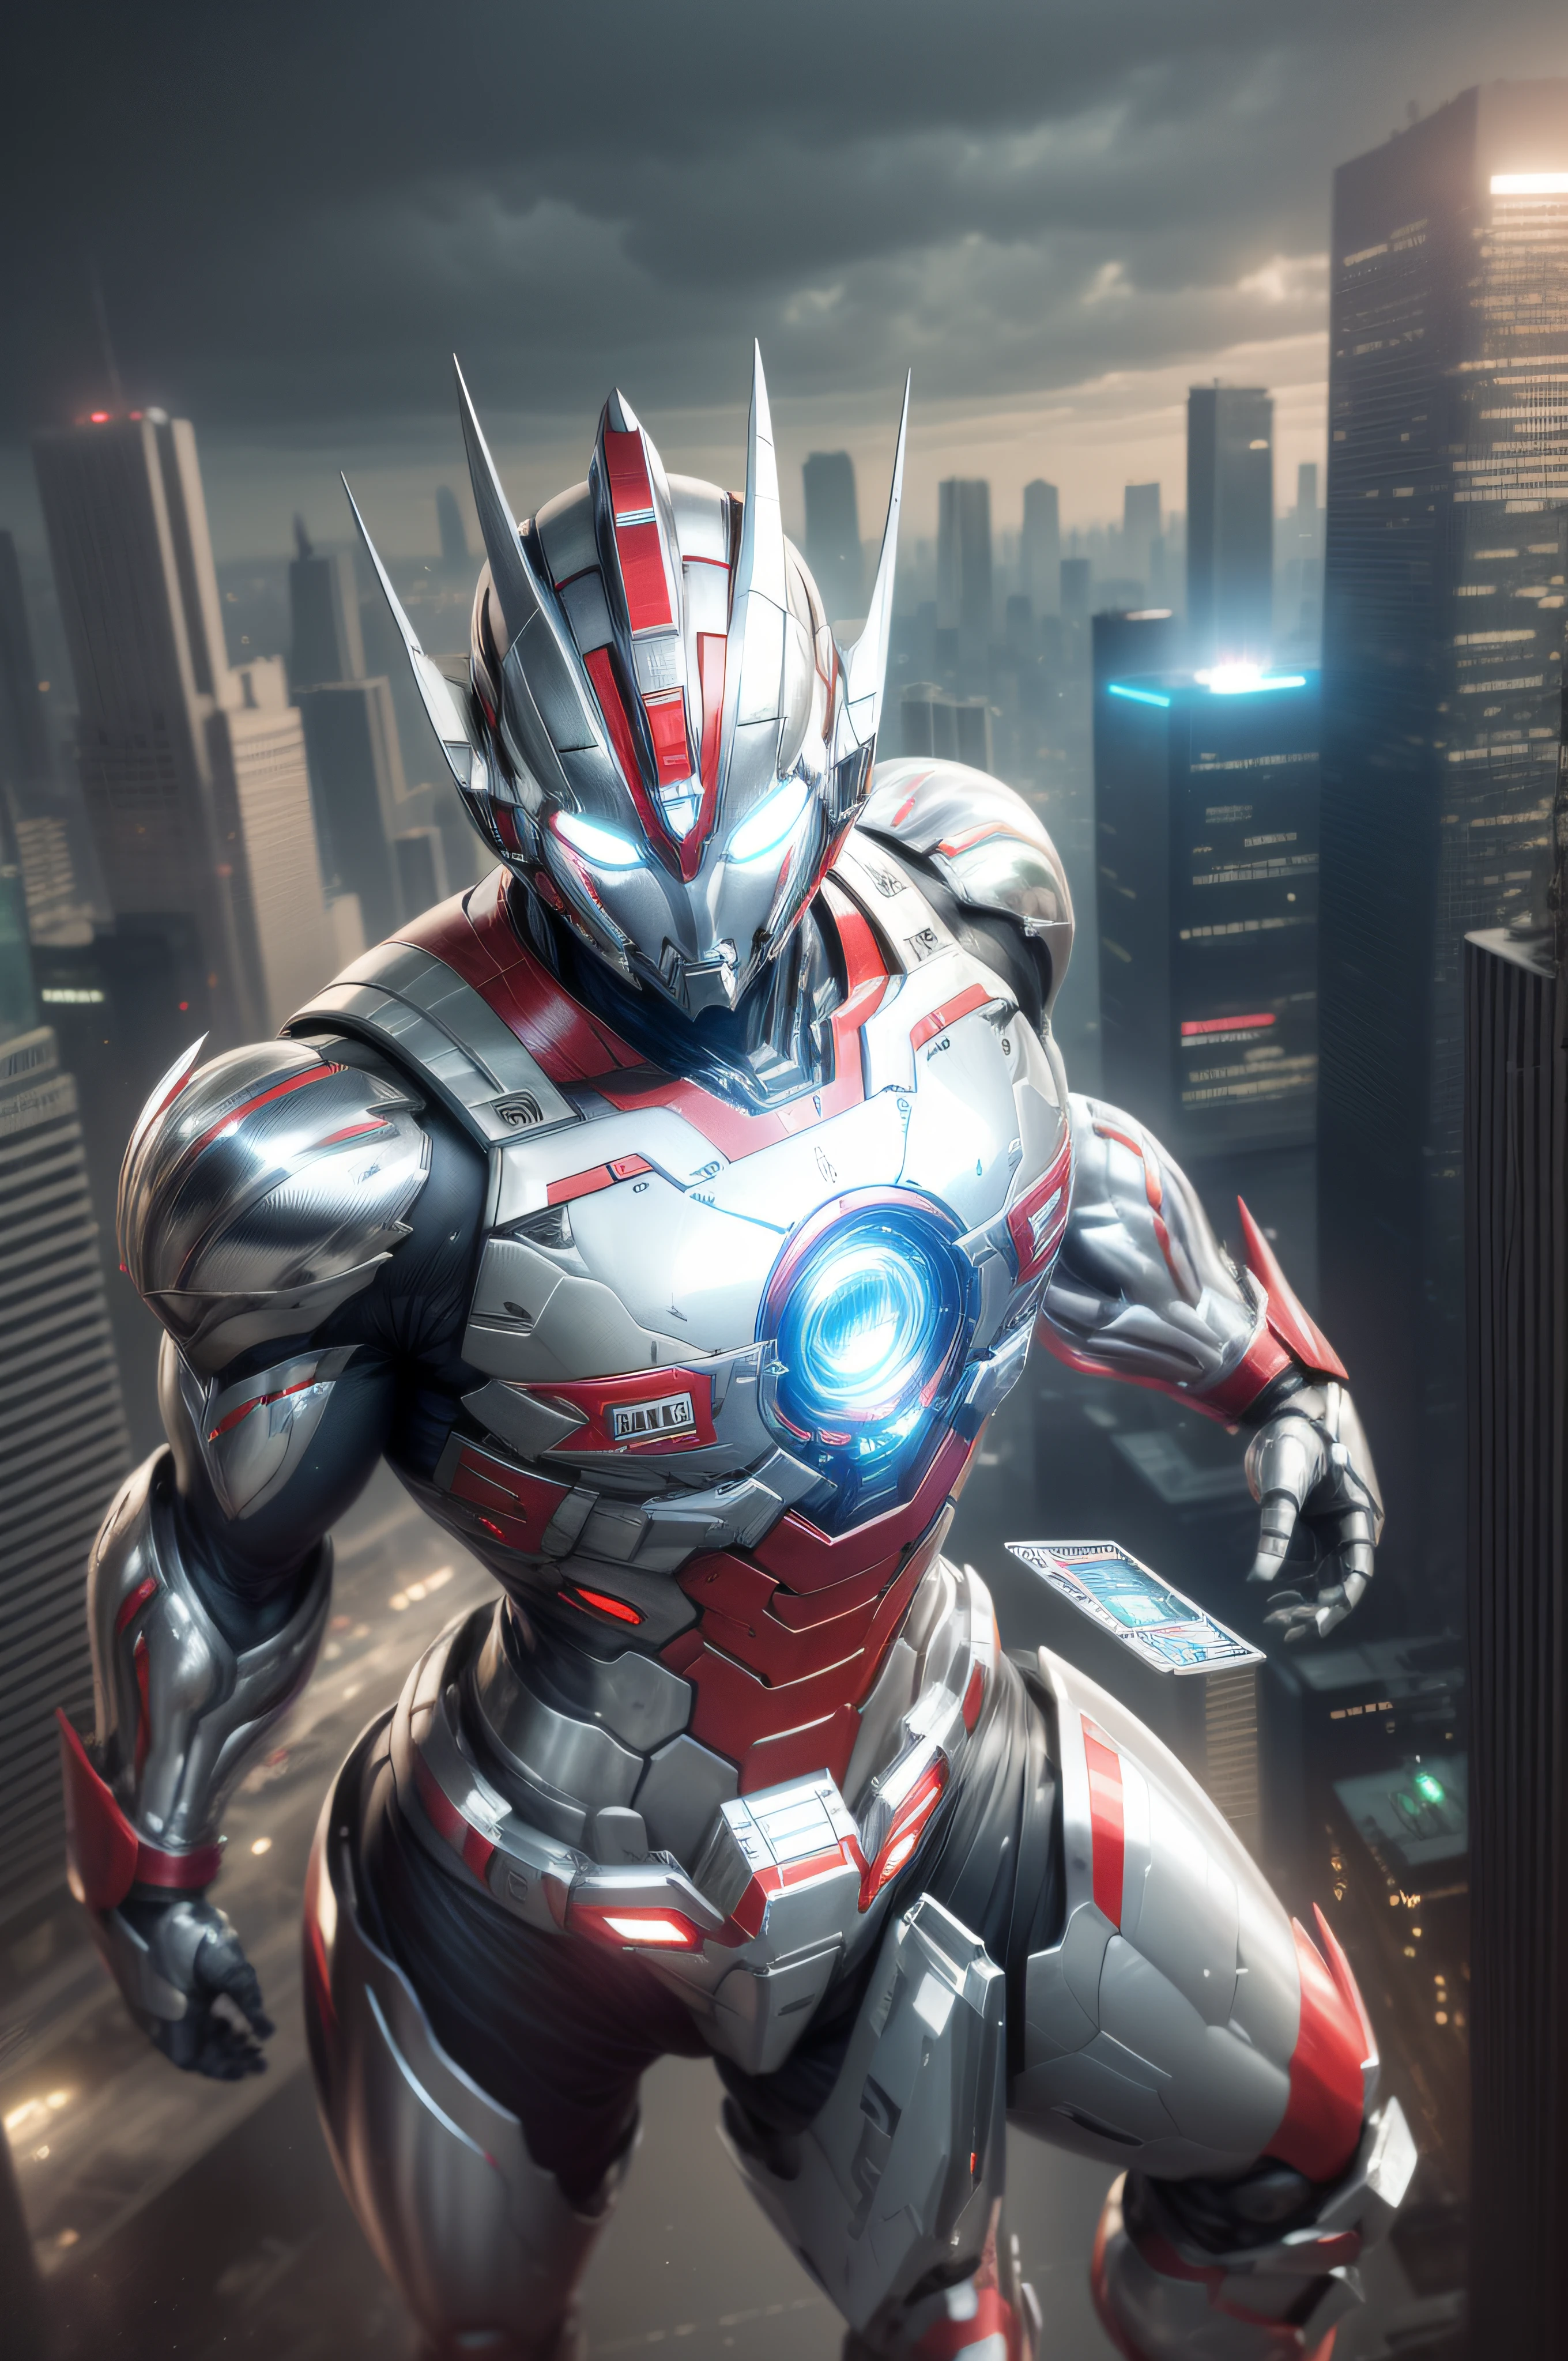 (Masterpiece, Superb Quality, Super Delicate, High Resolution), Male Focus, (((Mobile Ultraman))), (No Muscles))), (His head is tapered, his body is made of red and silver (((chrome))), his arms are streamlined, he has a round calculator on his chest, he looks tall and athletic, the overall look is streamlined and modern), (standing pose), pose for photos, high angle, dark night, city ruins, background details, ((((whole body))), from above, solo, photo-realistic, octane render, unreal engine, ultra-realistic ((( Huge feeling)))